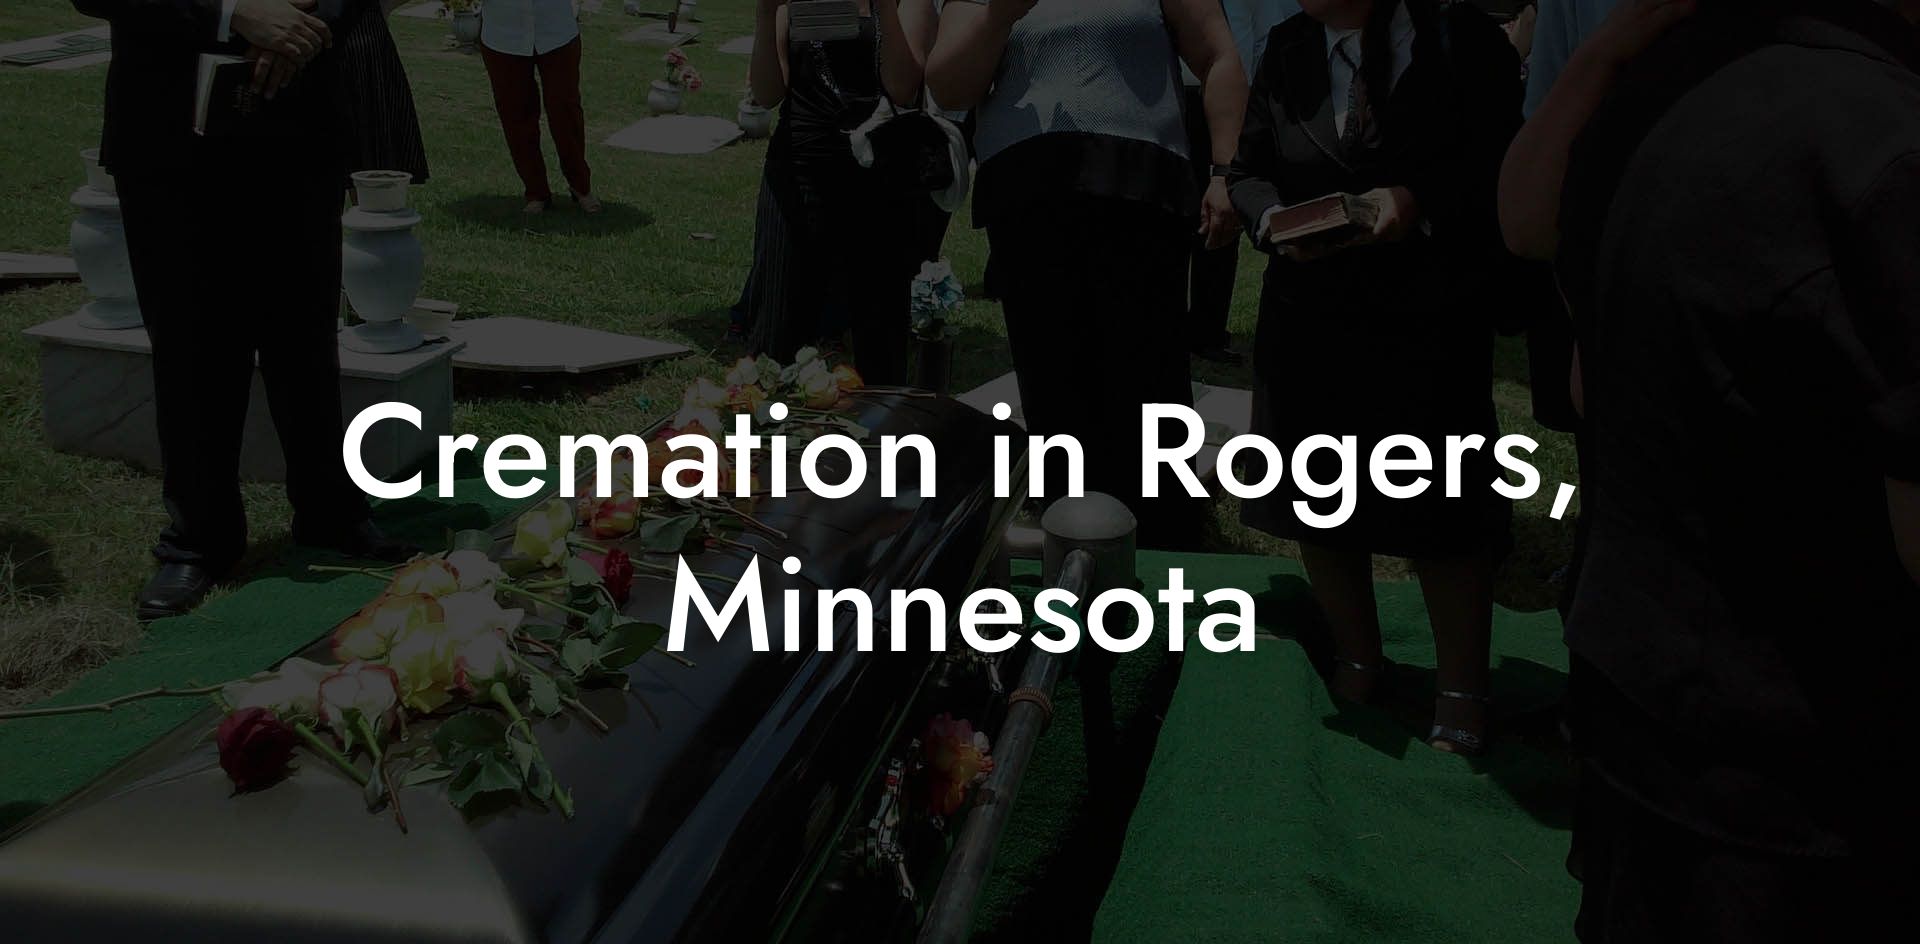 Cremation in Rogers, Minnesota